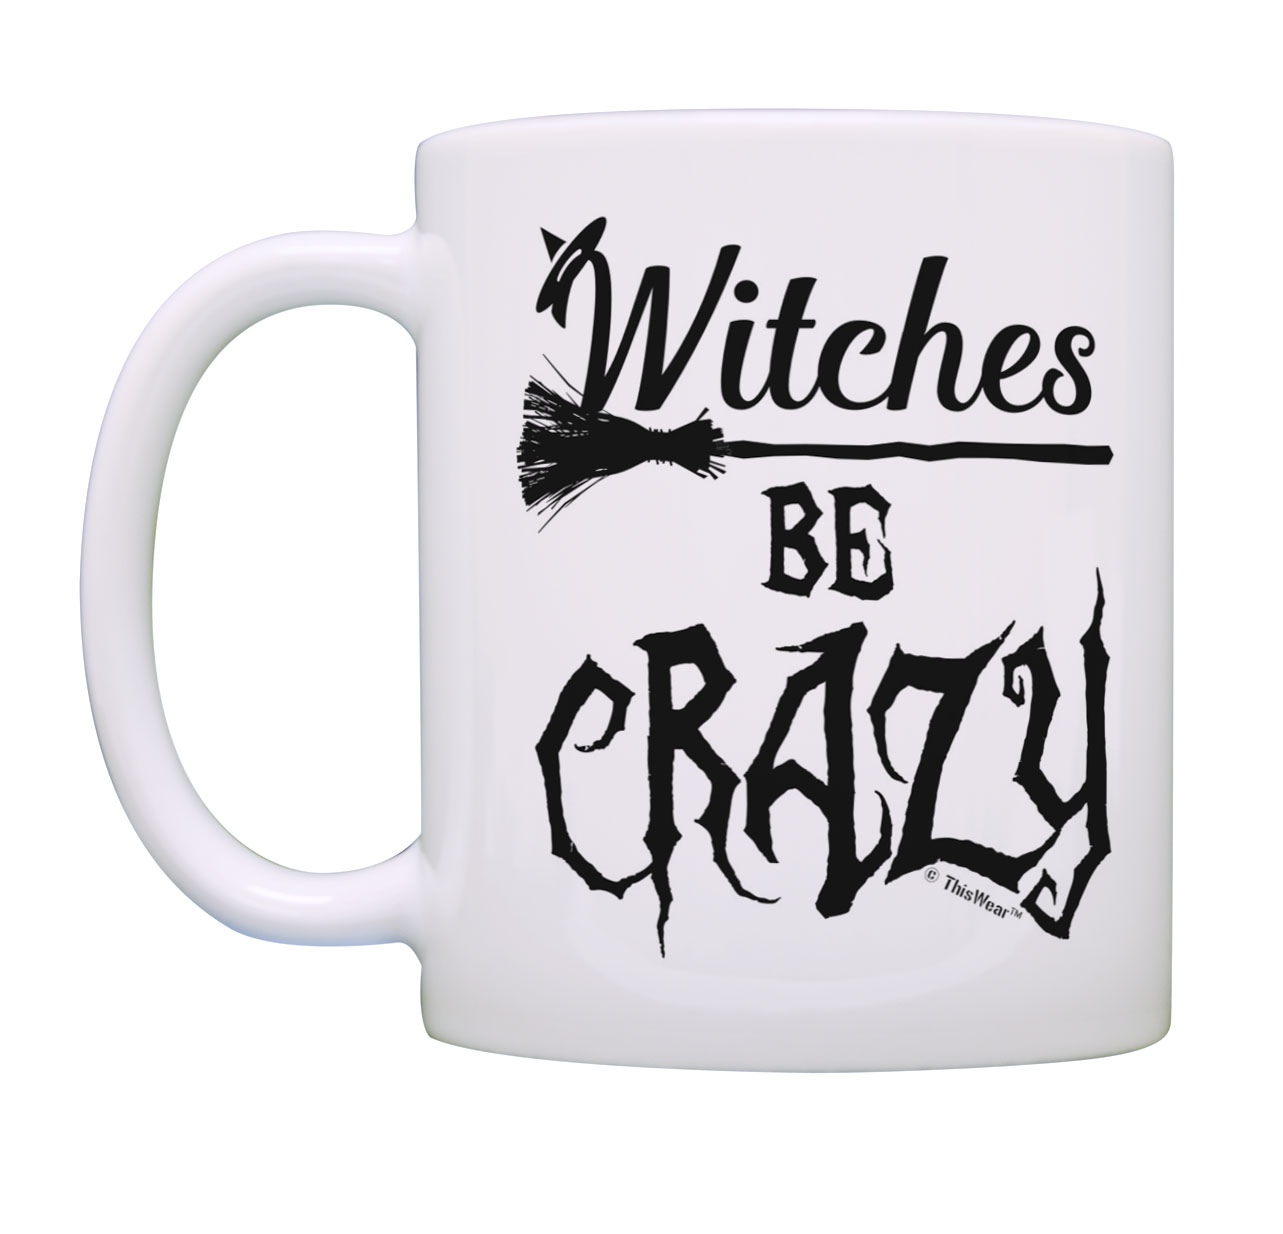 ThisWear Witch Gifts Witches Be Crazy Halloween Mug Set Pun Mug Set 11 ounce 2 Pack Coffee Mugs - image 2 of 4